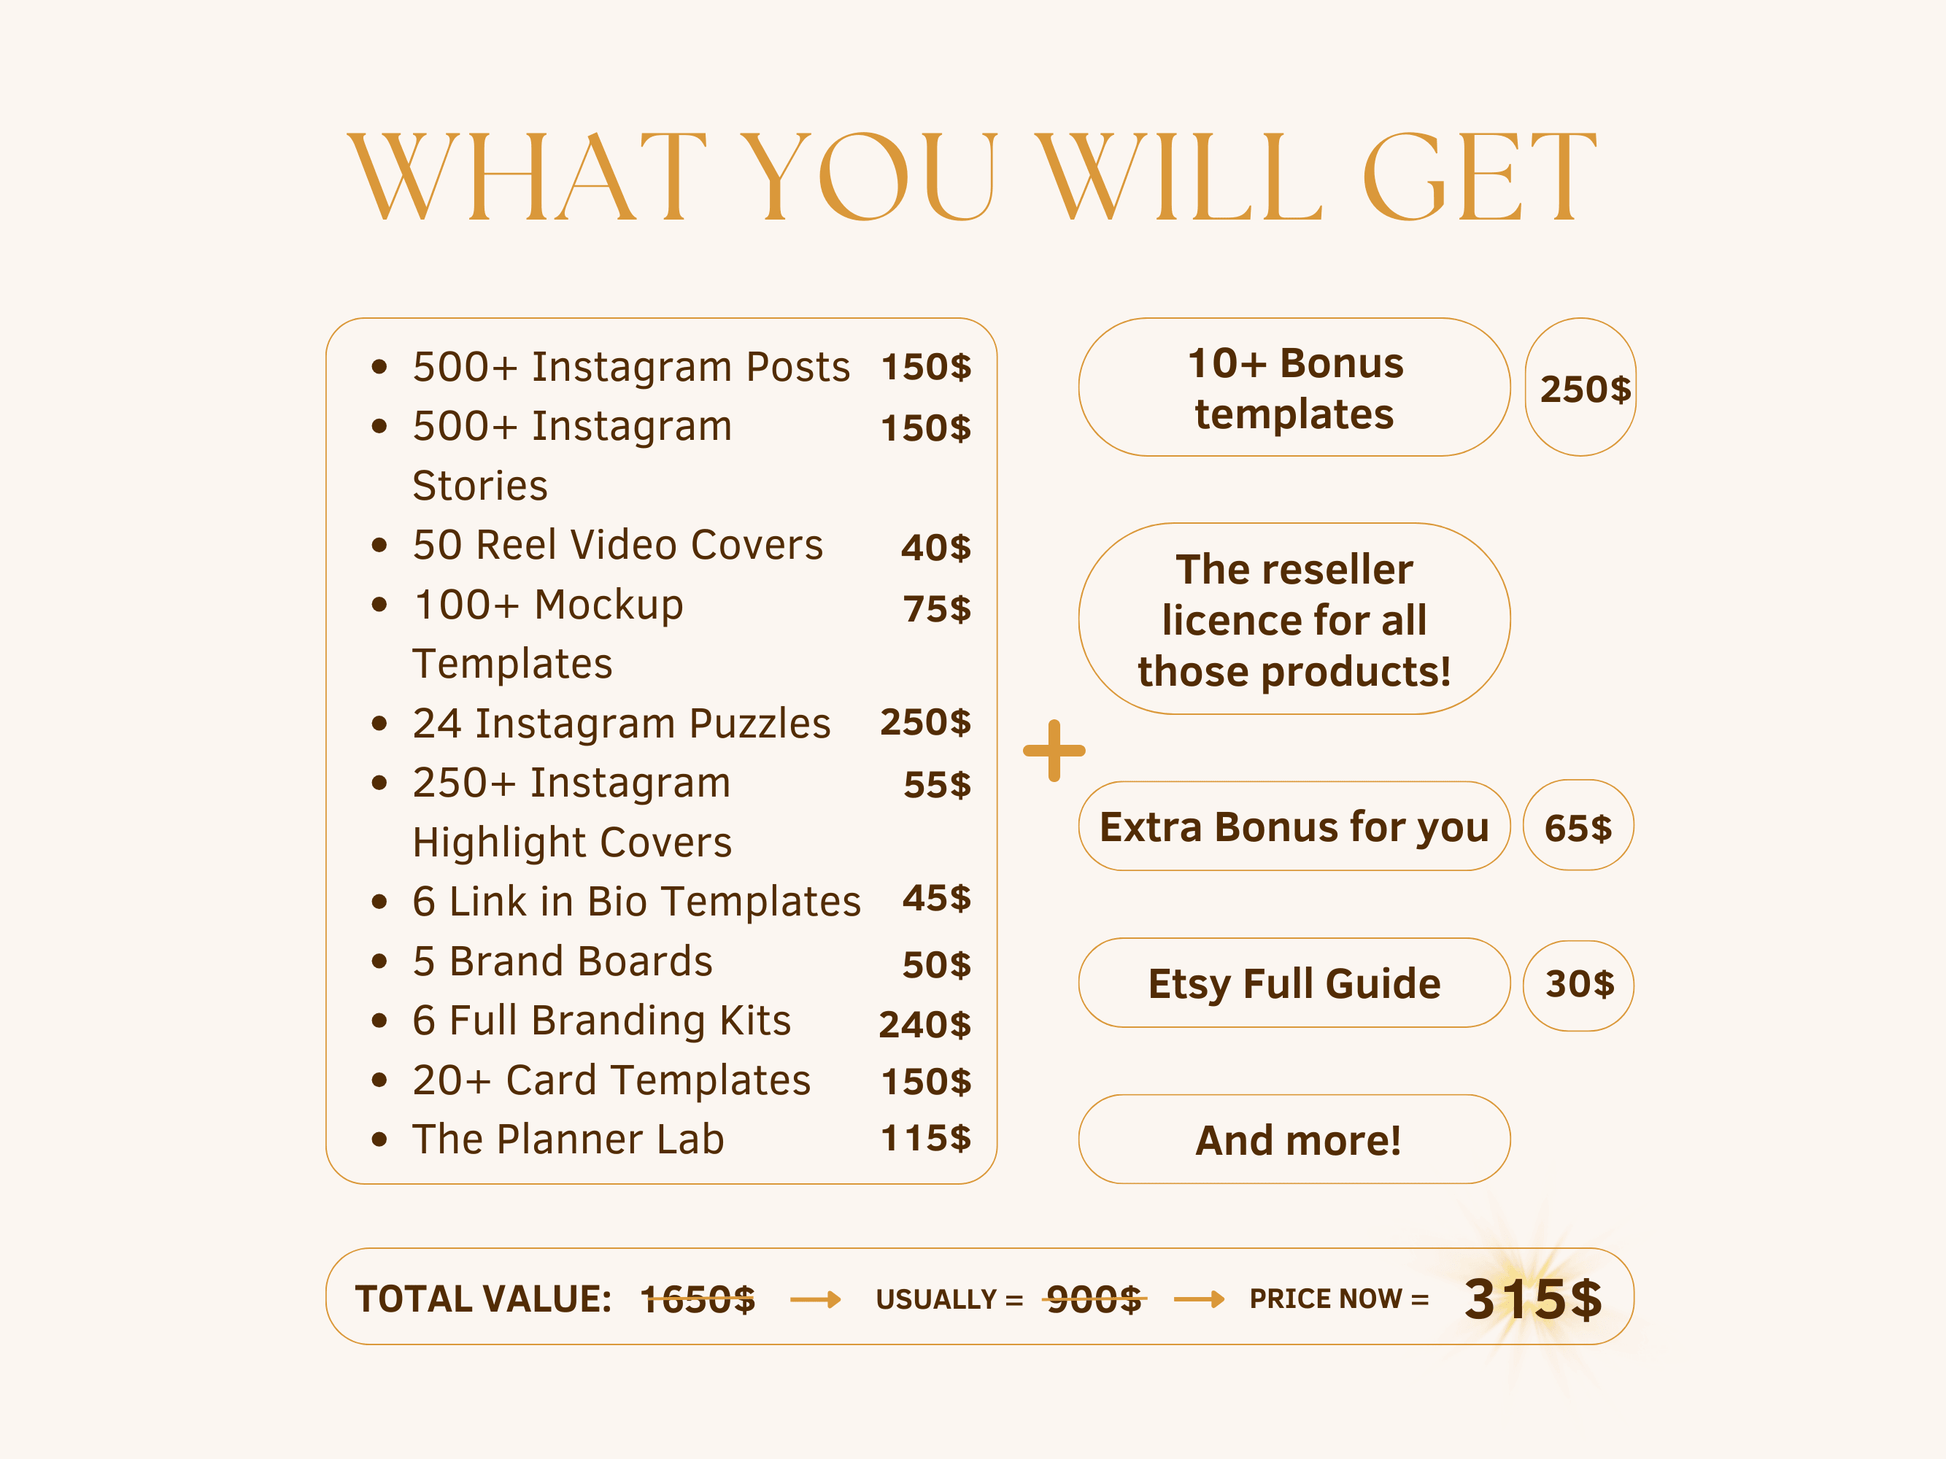 What will you get? This bundle includes 500+ Instagram posts, 500+ Instagram stories, 50 Instagram reel video covers, 250+ Instagram highlight covers, 6 full branding kits and more, as well as bonuses. Usually for 900$, now for 315$. For content creators and business owners.